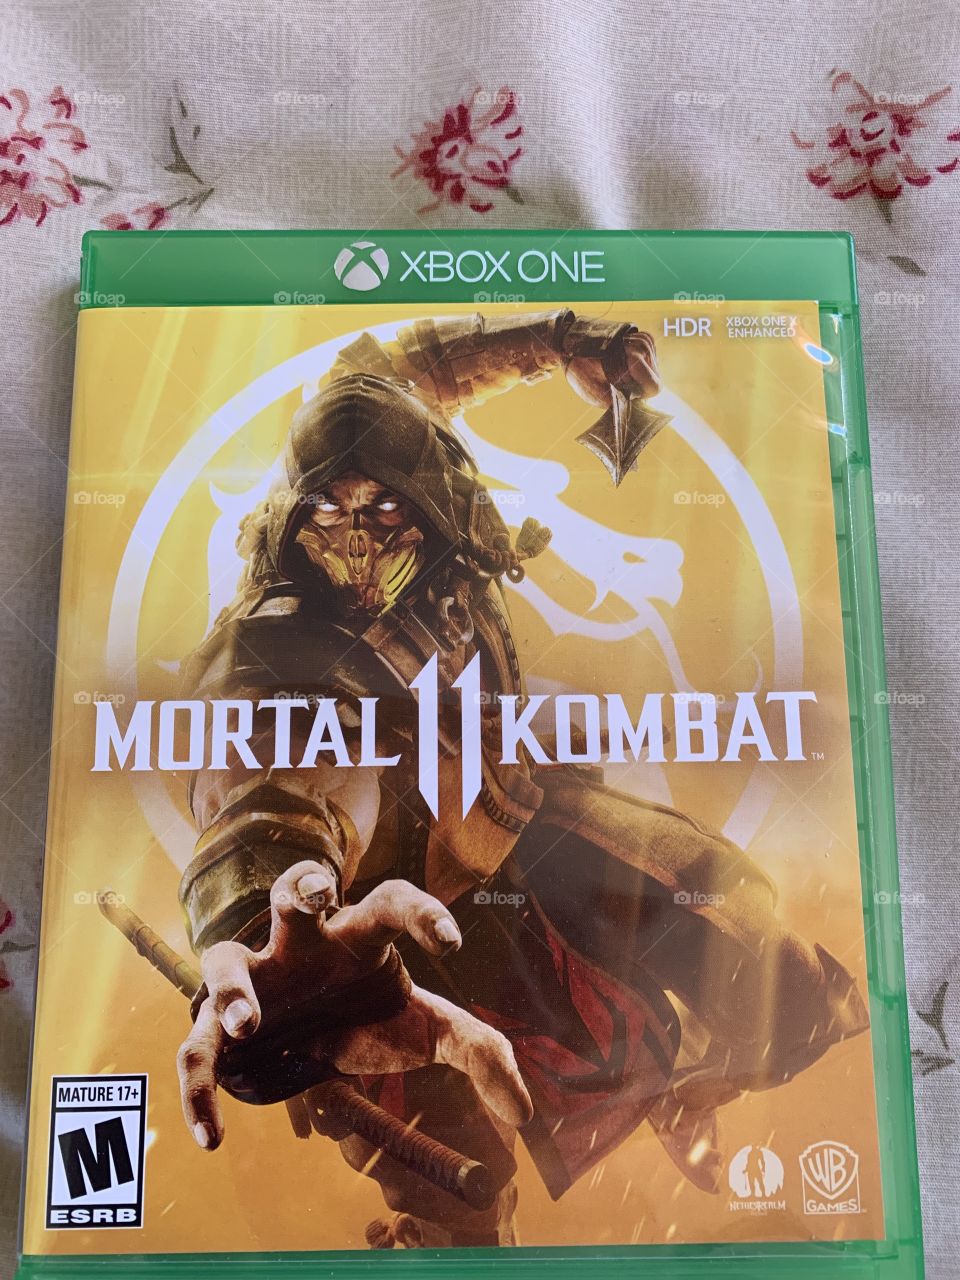 Are you ready to fight? One on one match ? Bring your friends over and play the best mortal Kombat game ever in history ! Mortal Kombat 11 is back ! And better than ever ! With all new fatal blows , crushing blows , new fatalities & more ! 